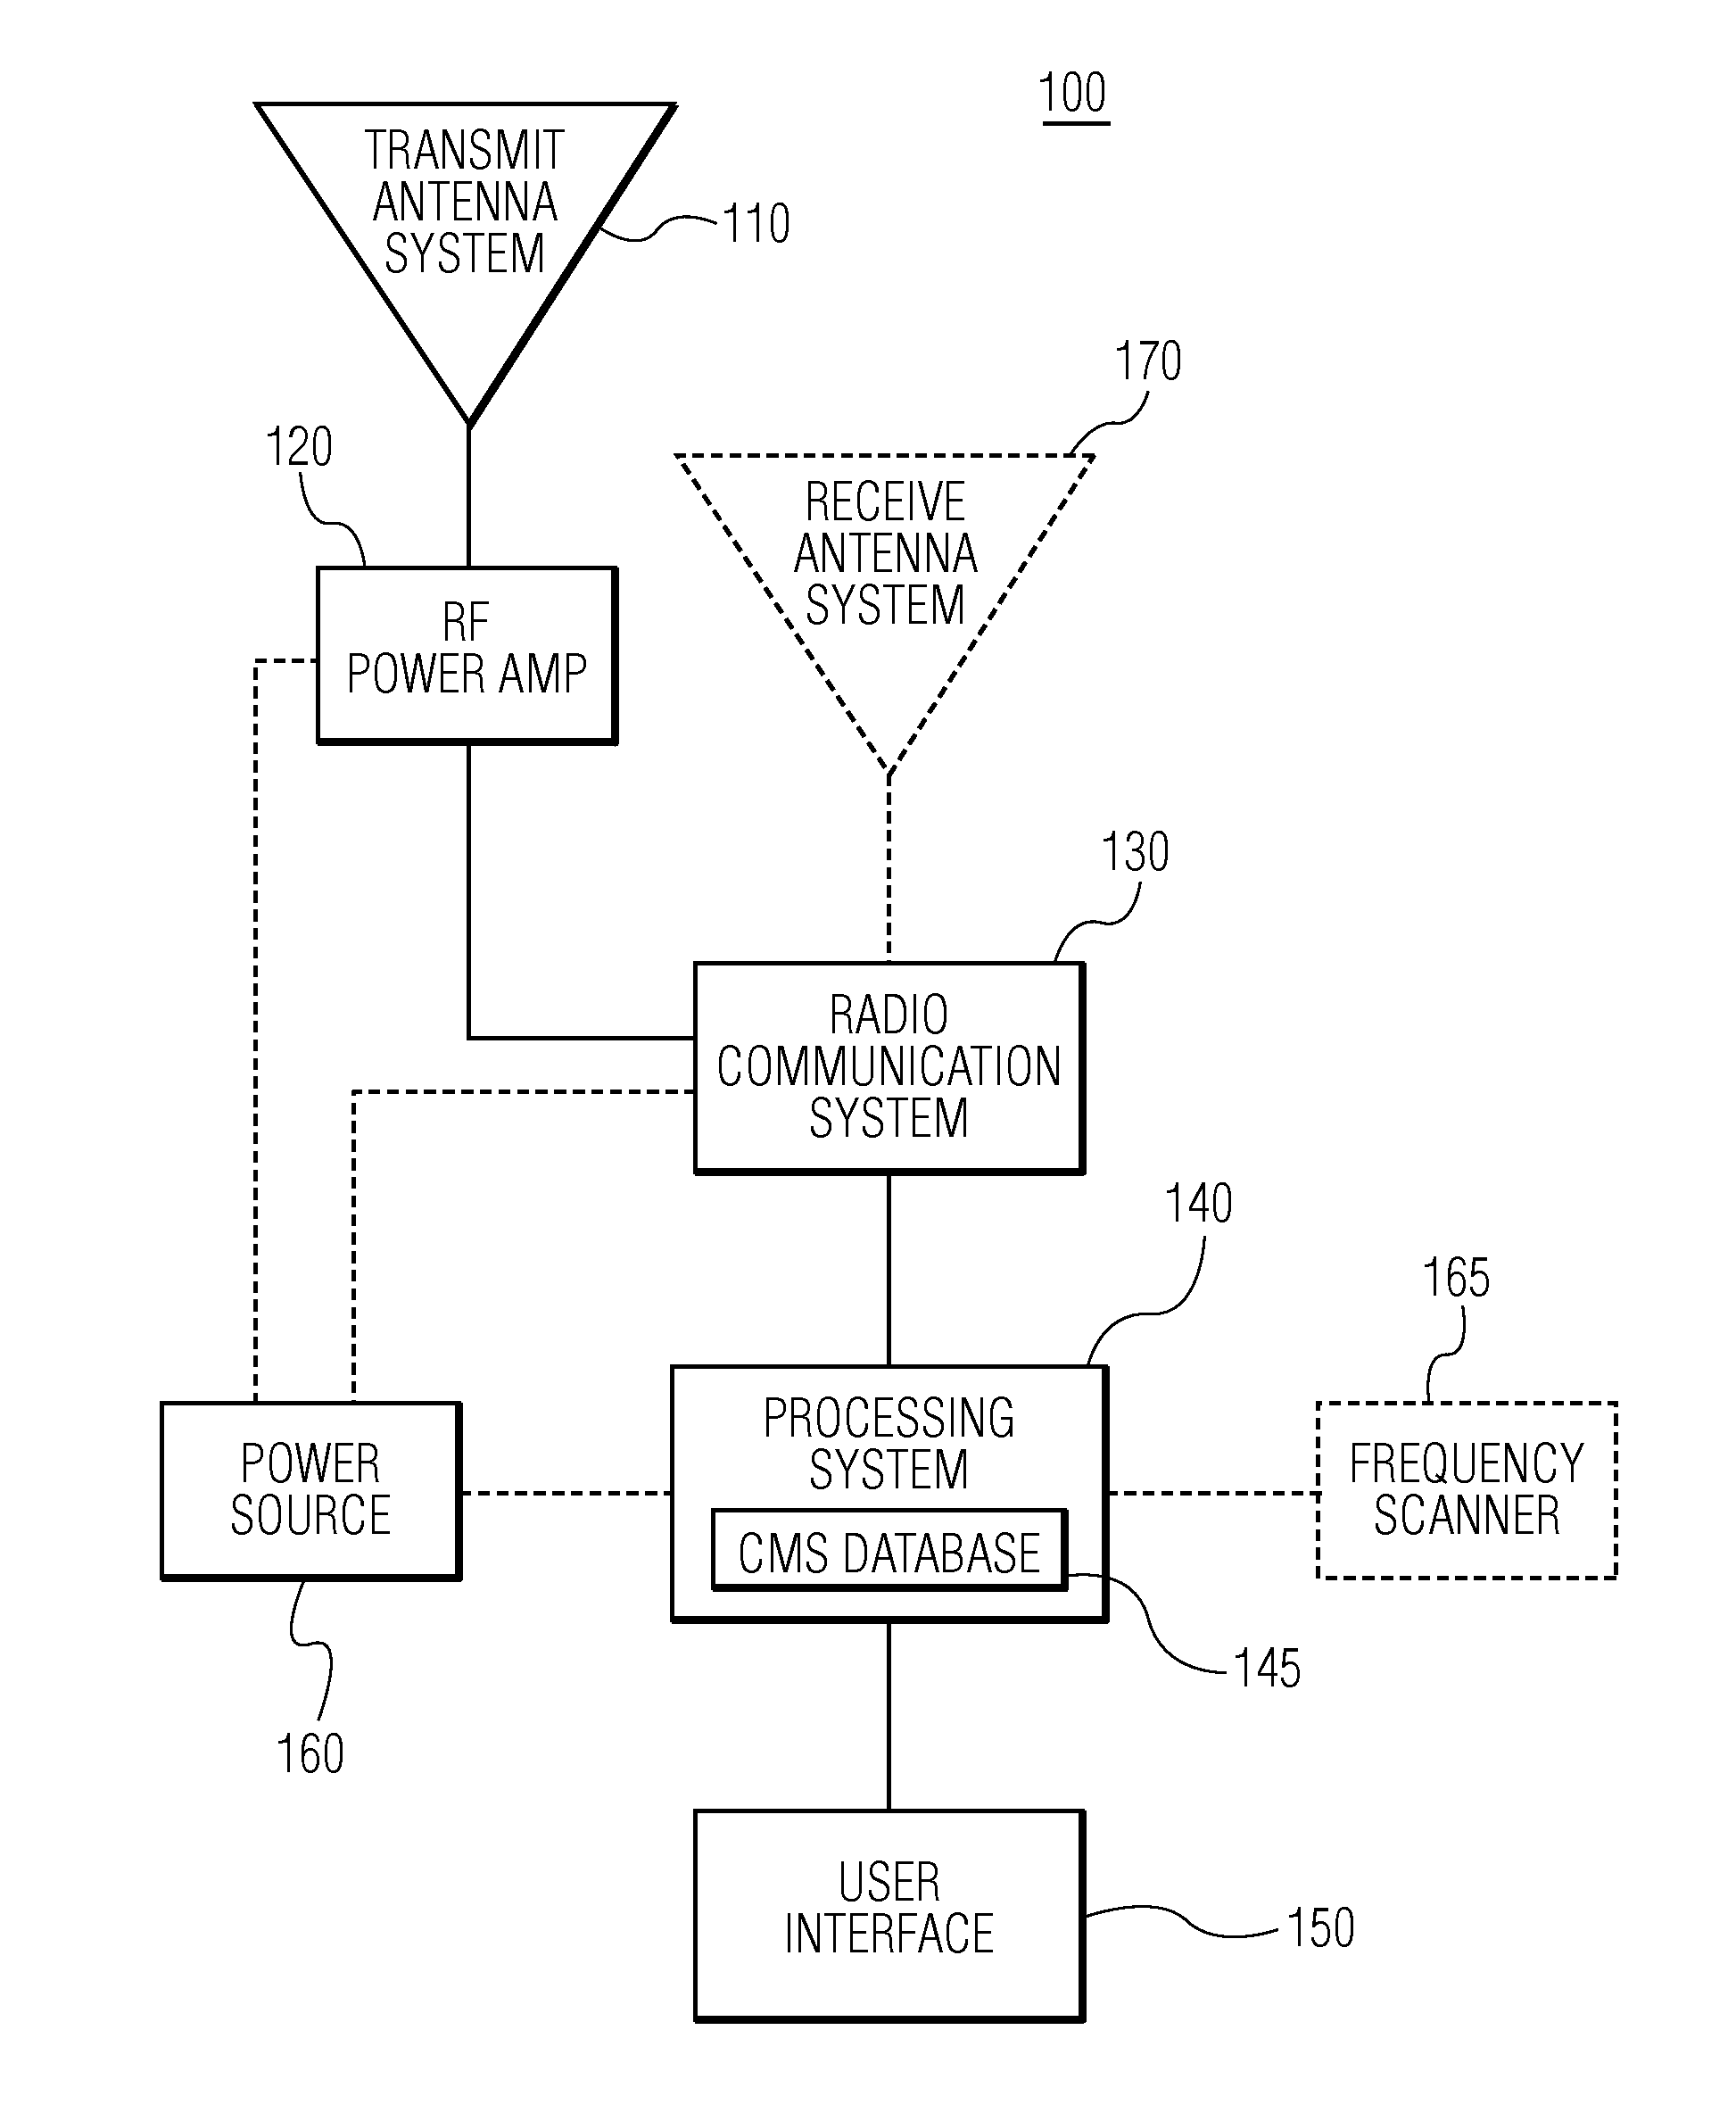 Systems and methods for radio frequency hopping communications jamming utilizing software defined radio platforms